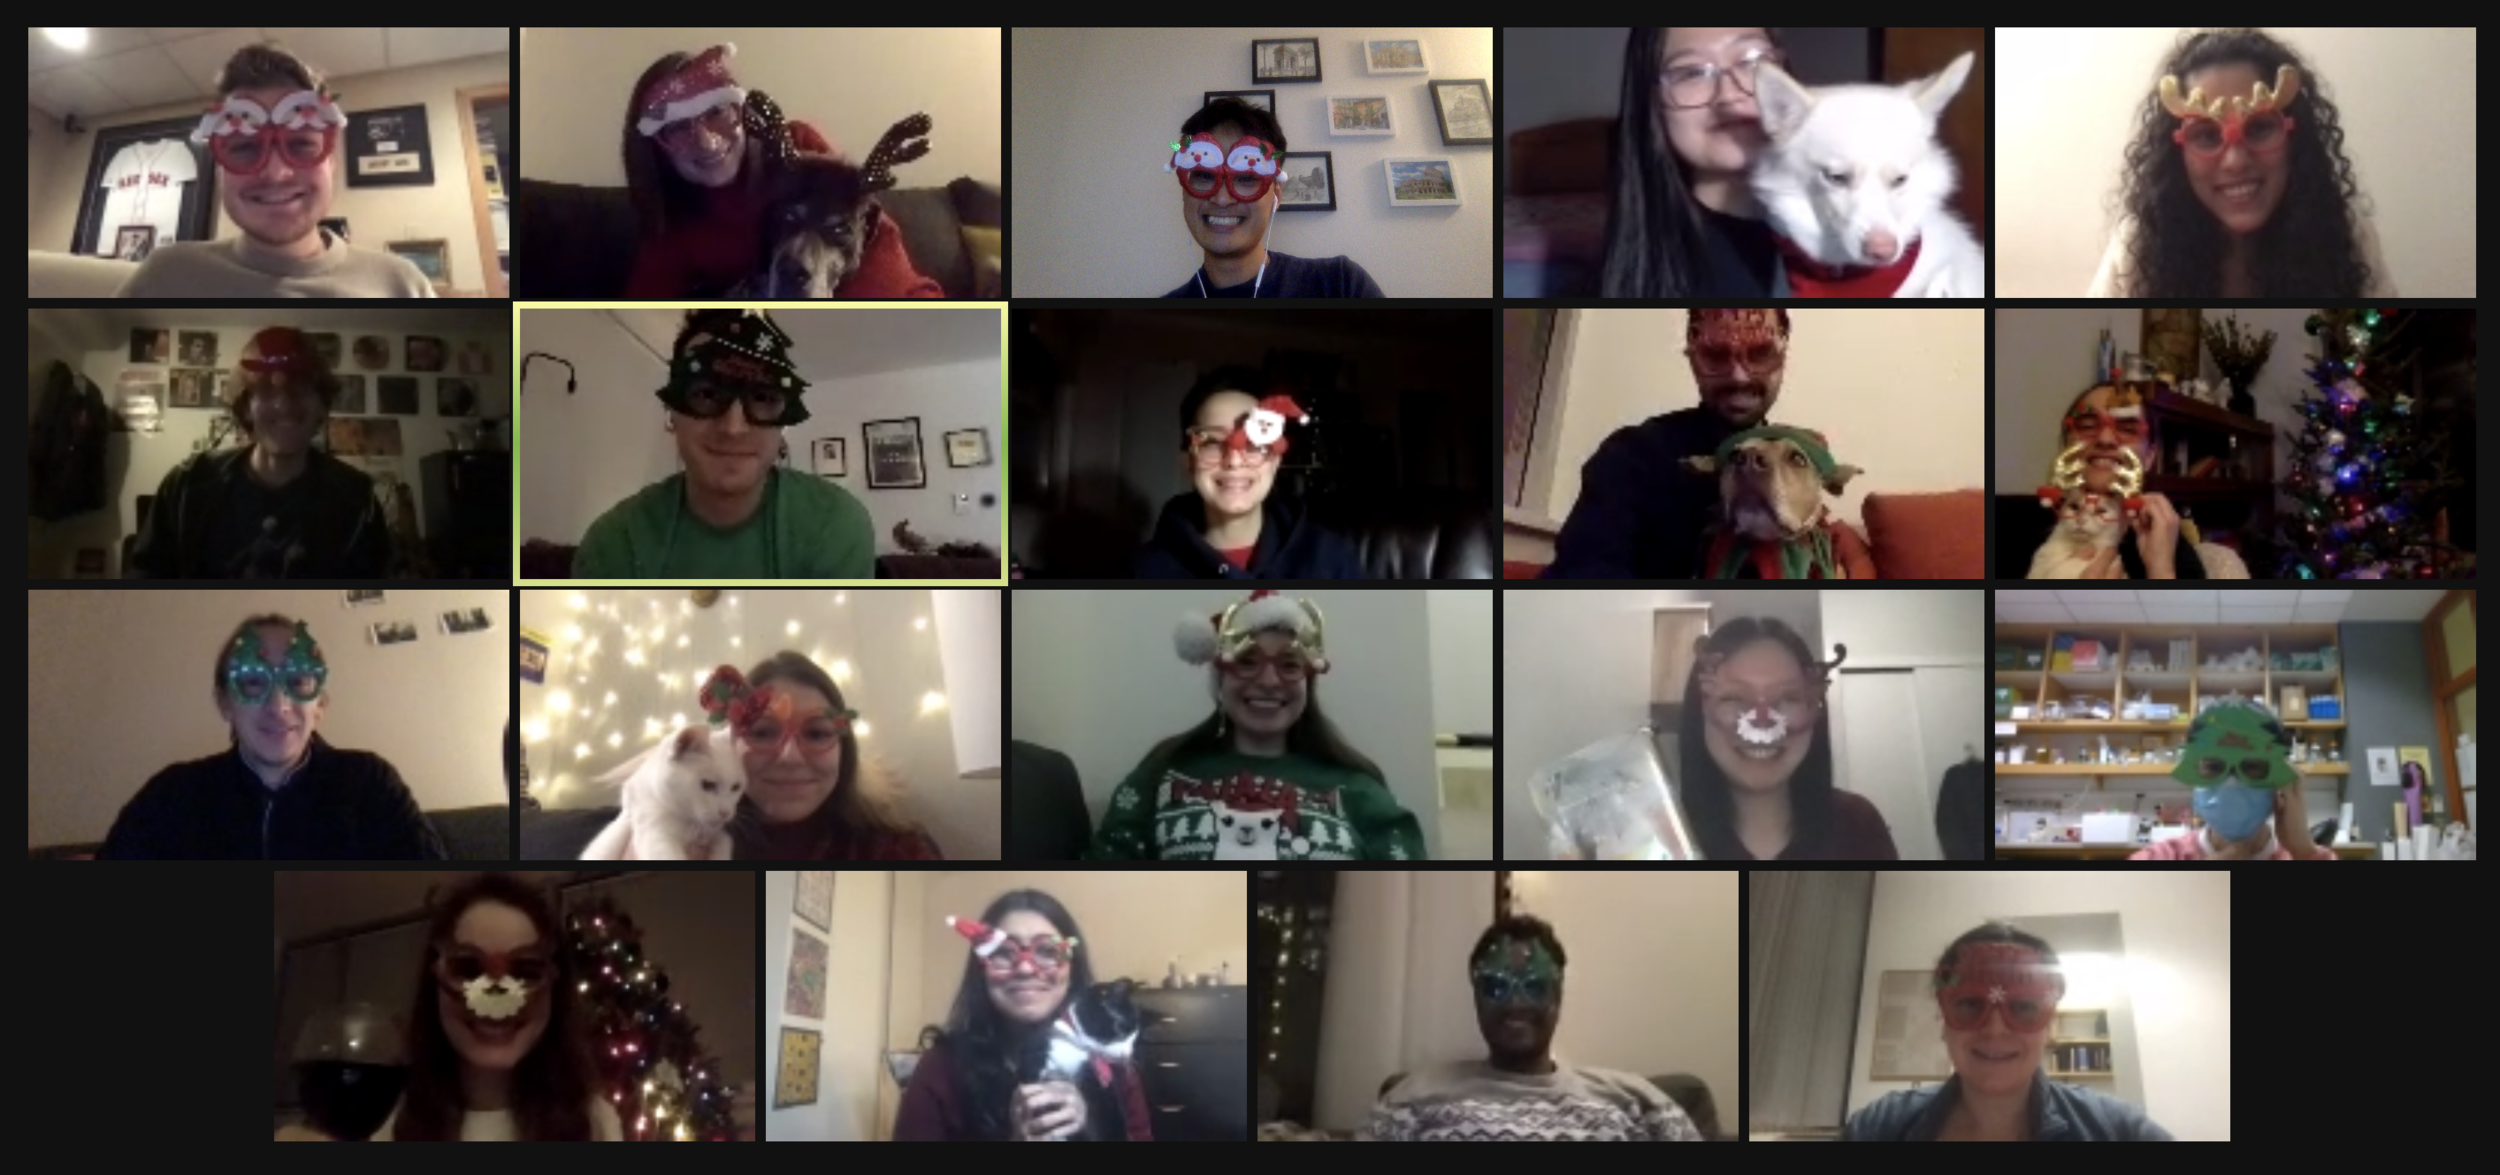 Our Virtual Holiday Party